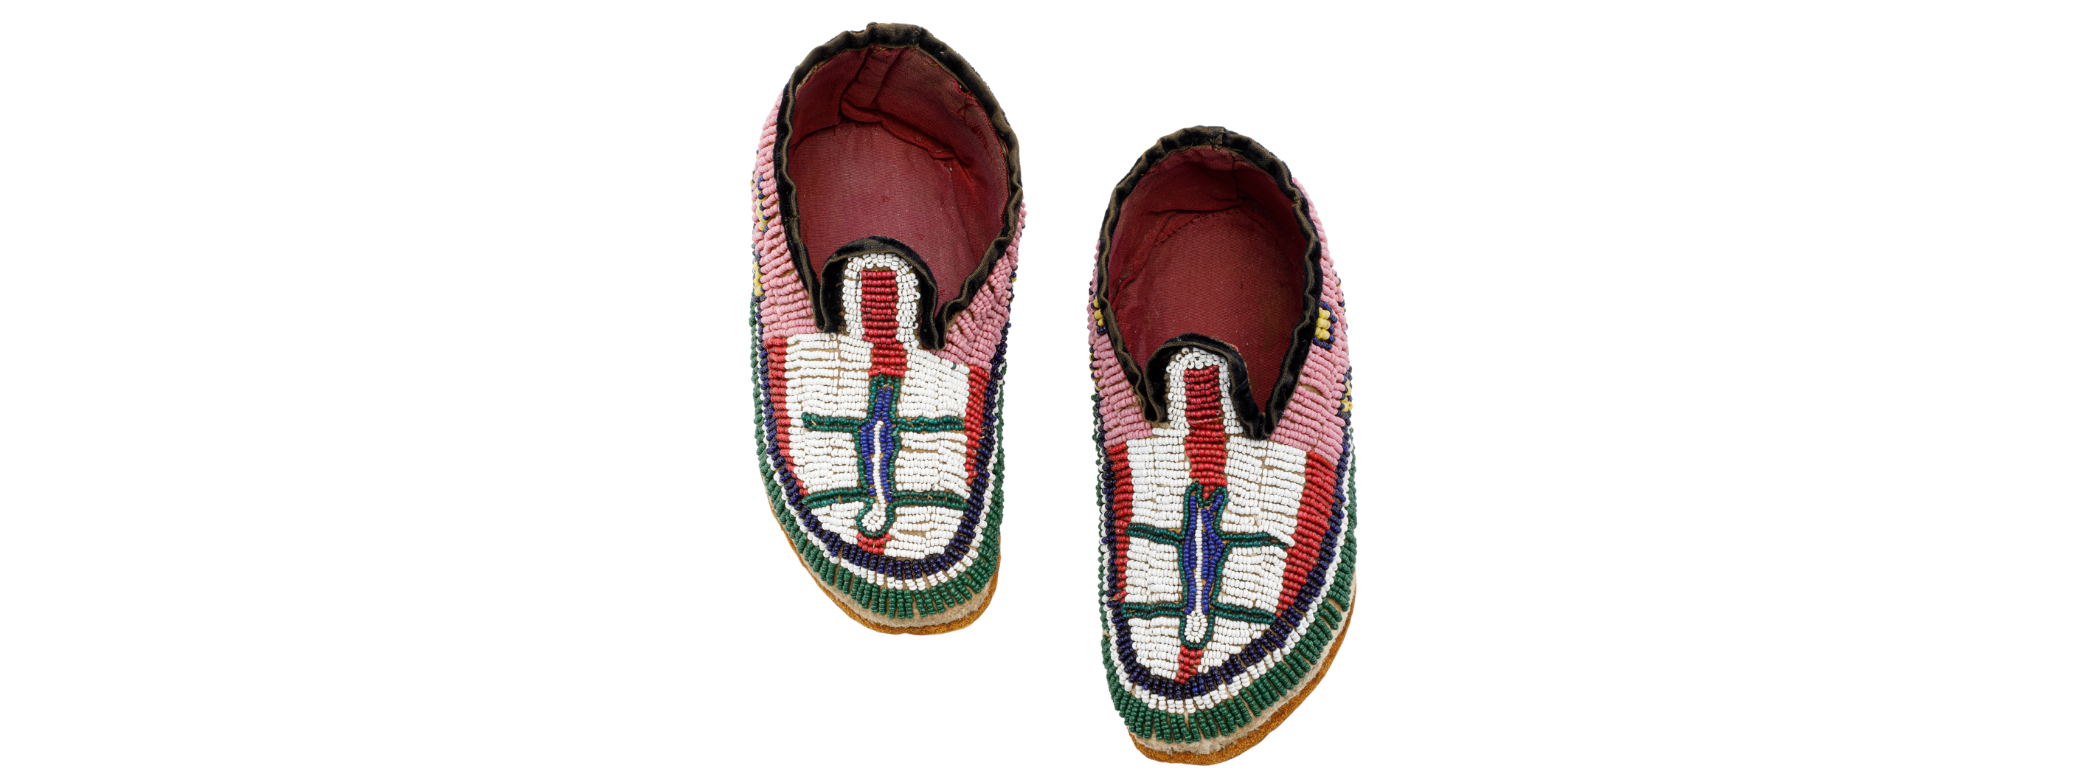 A pair of child’s moccasins with toes pointing down. The insides are lined with pink fabric, and the exterior is covered in brightly coloured glass beads. The beads are pink near the ankle, the vamp has white and red along with a figurative image in the centre, and the edges are lined with rows of blue, white, and green.